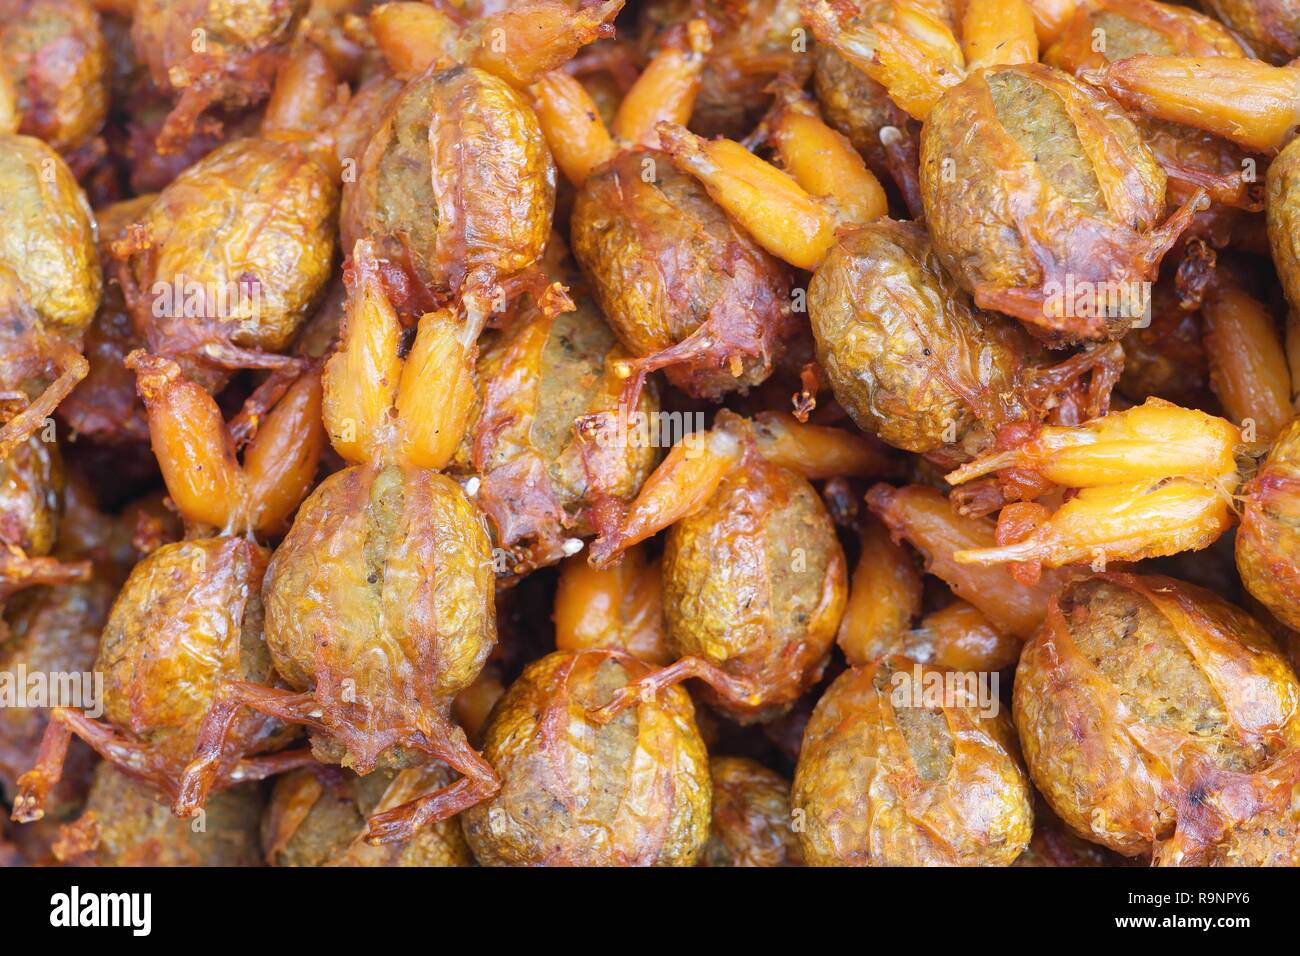 Fried pork-stuffed frogs meat. The fried rice field frogs are filled with  minced pork before being fried Stock Photo - Alamy